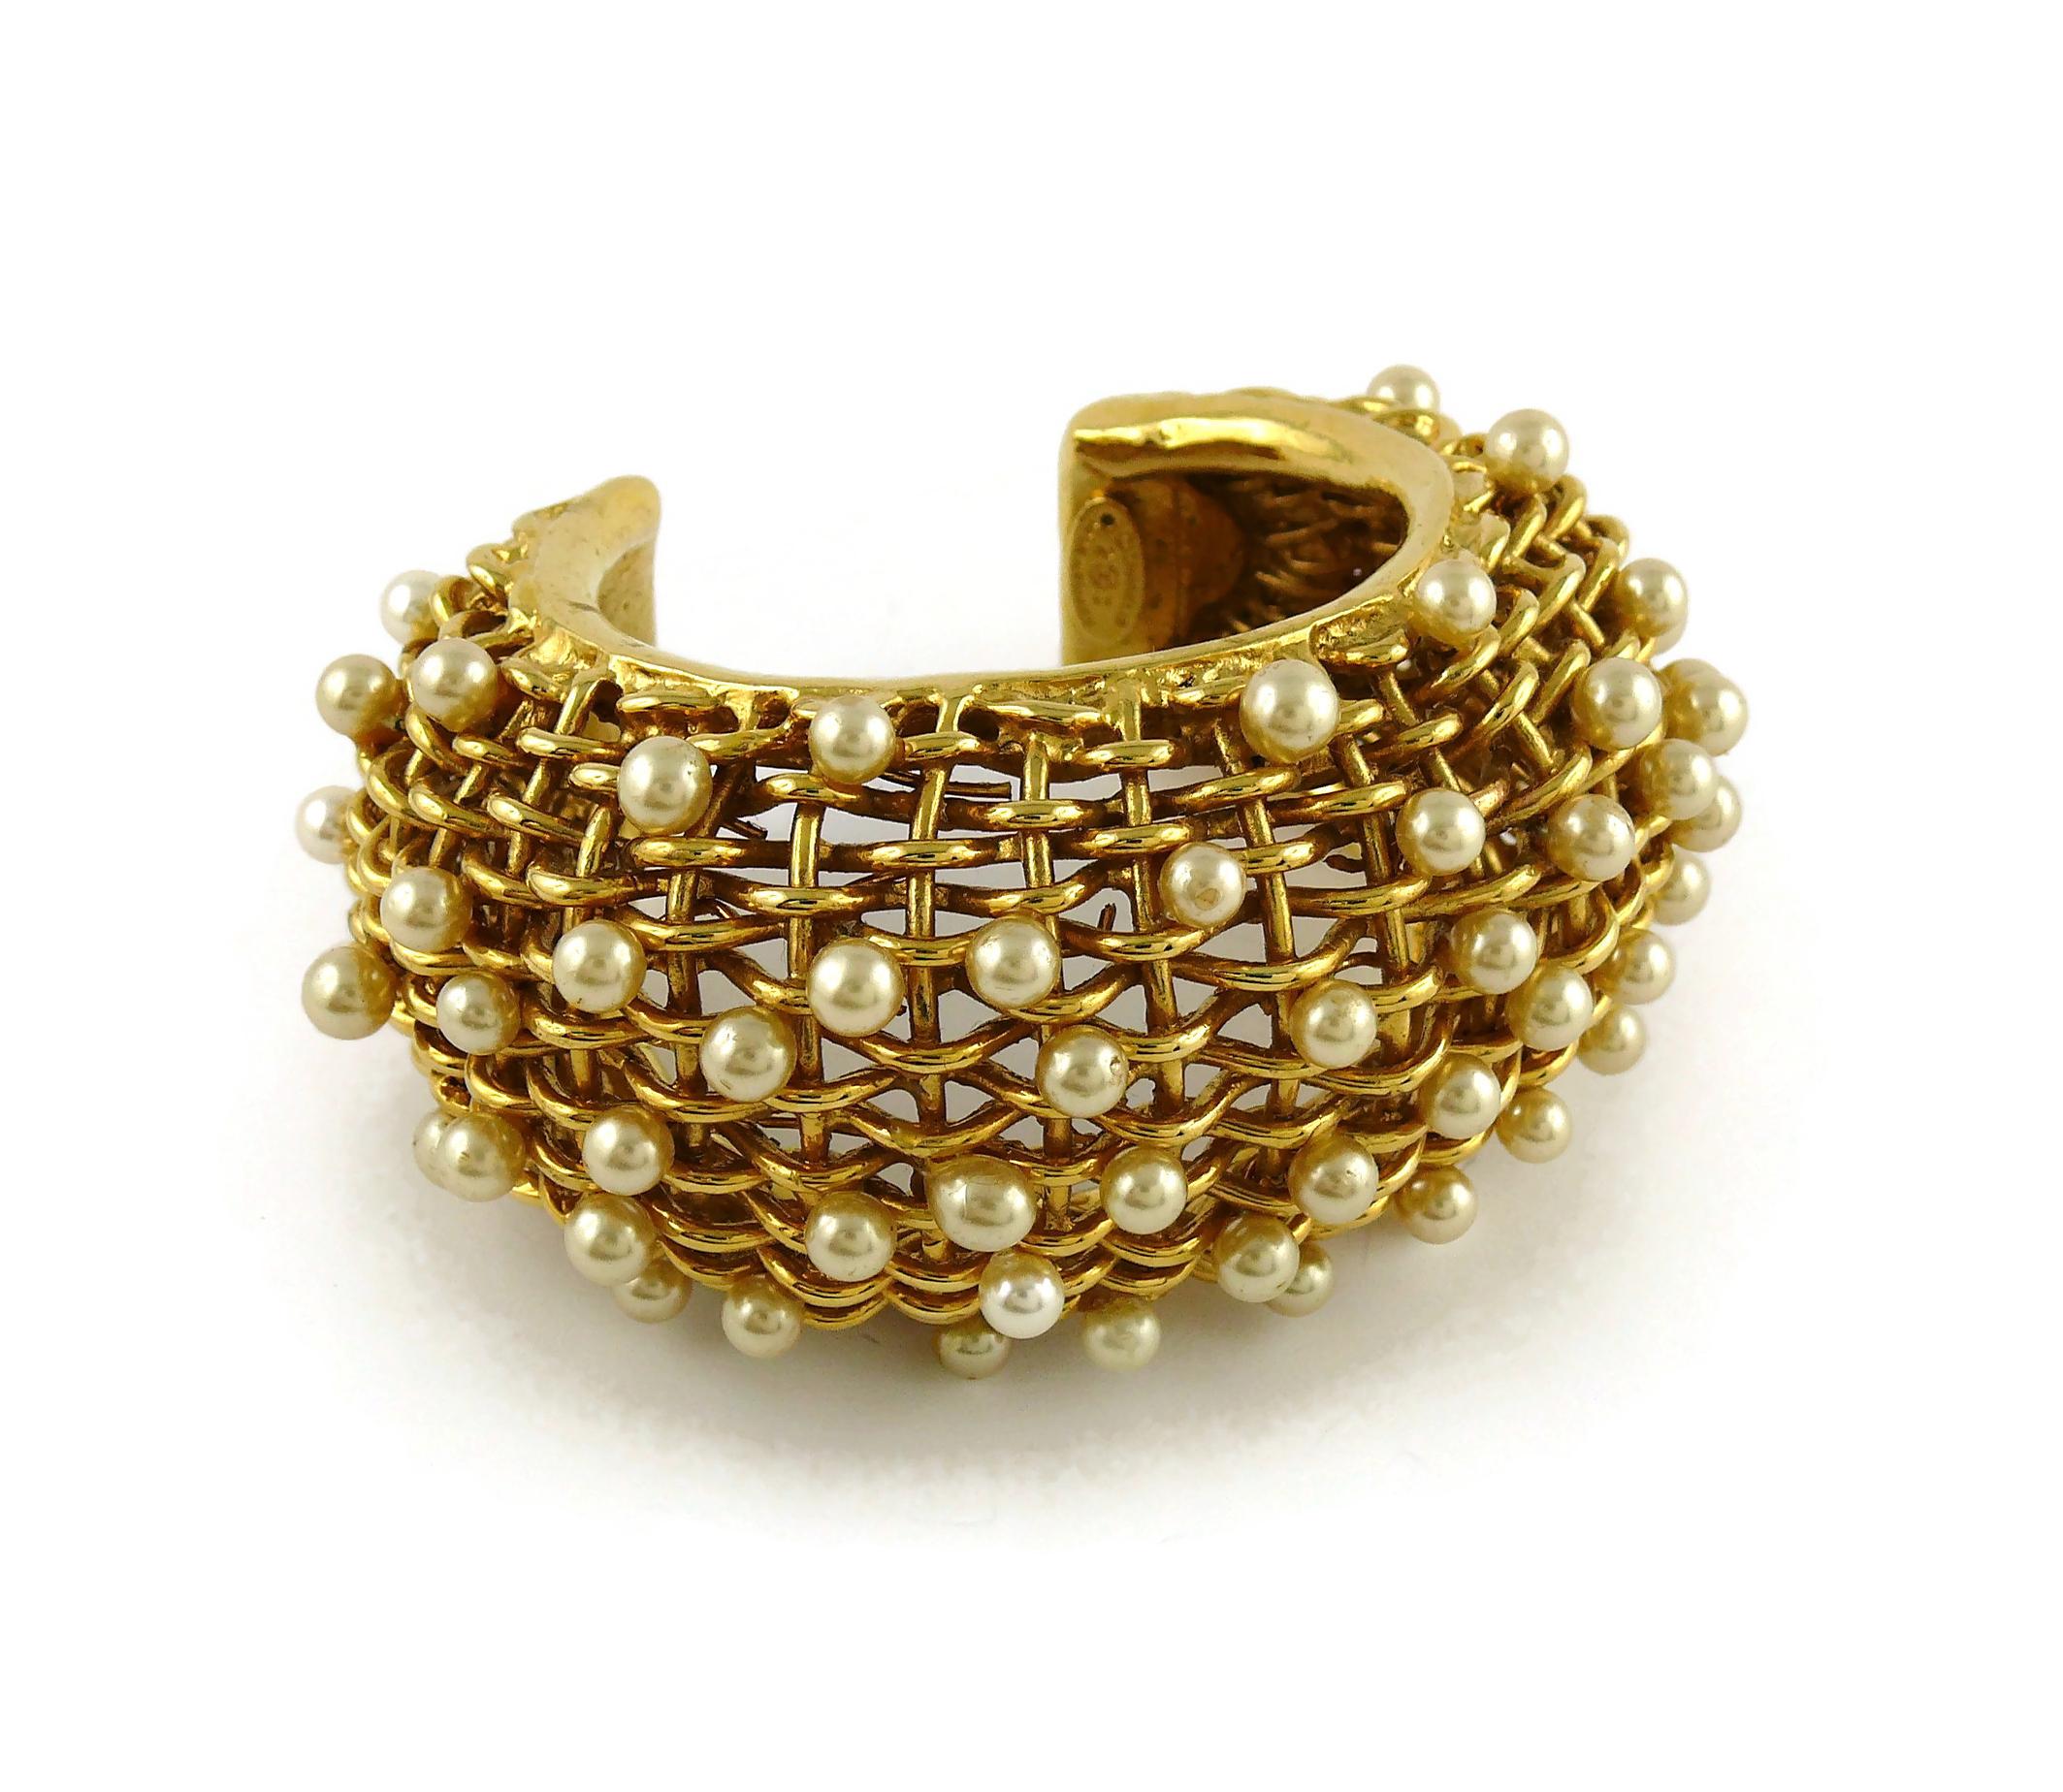 Chanel Vintage 1988 Gold Toned Braided Pearl Wide Cuff Bracelet For Sale 3